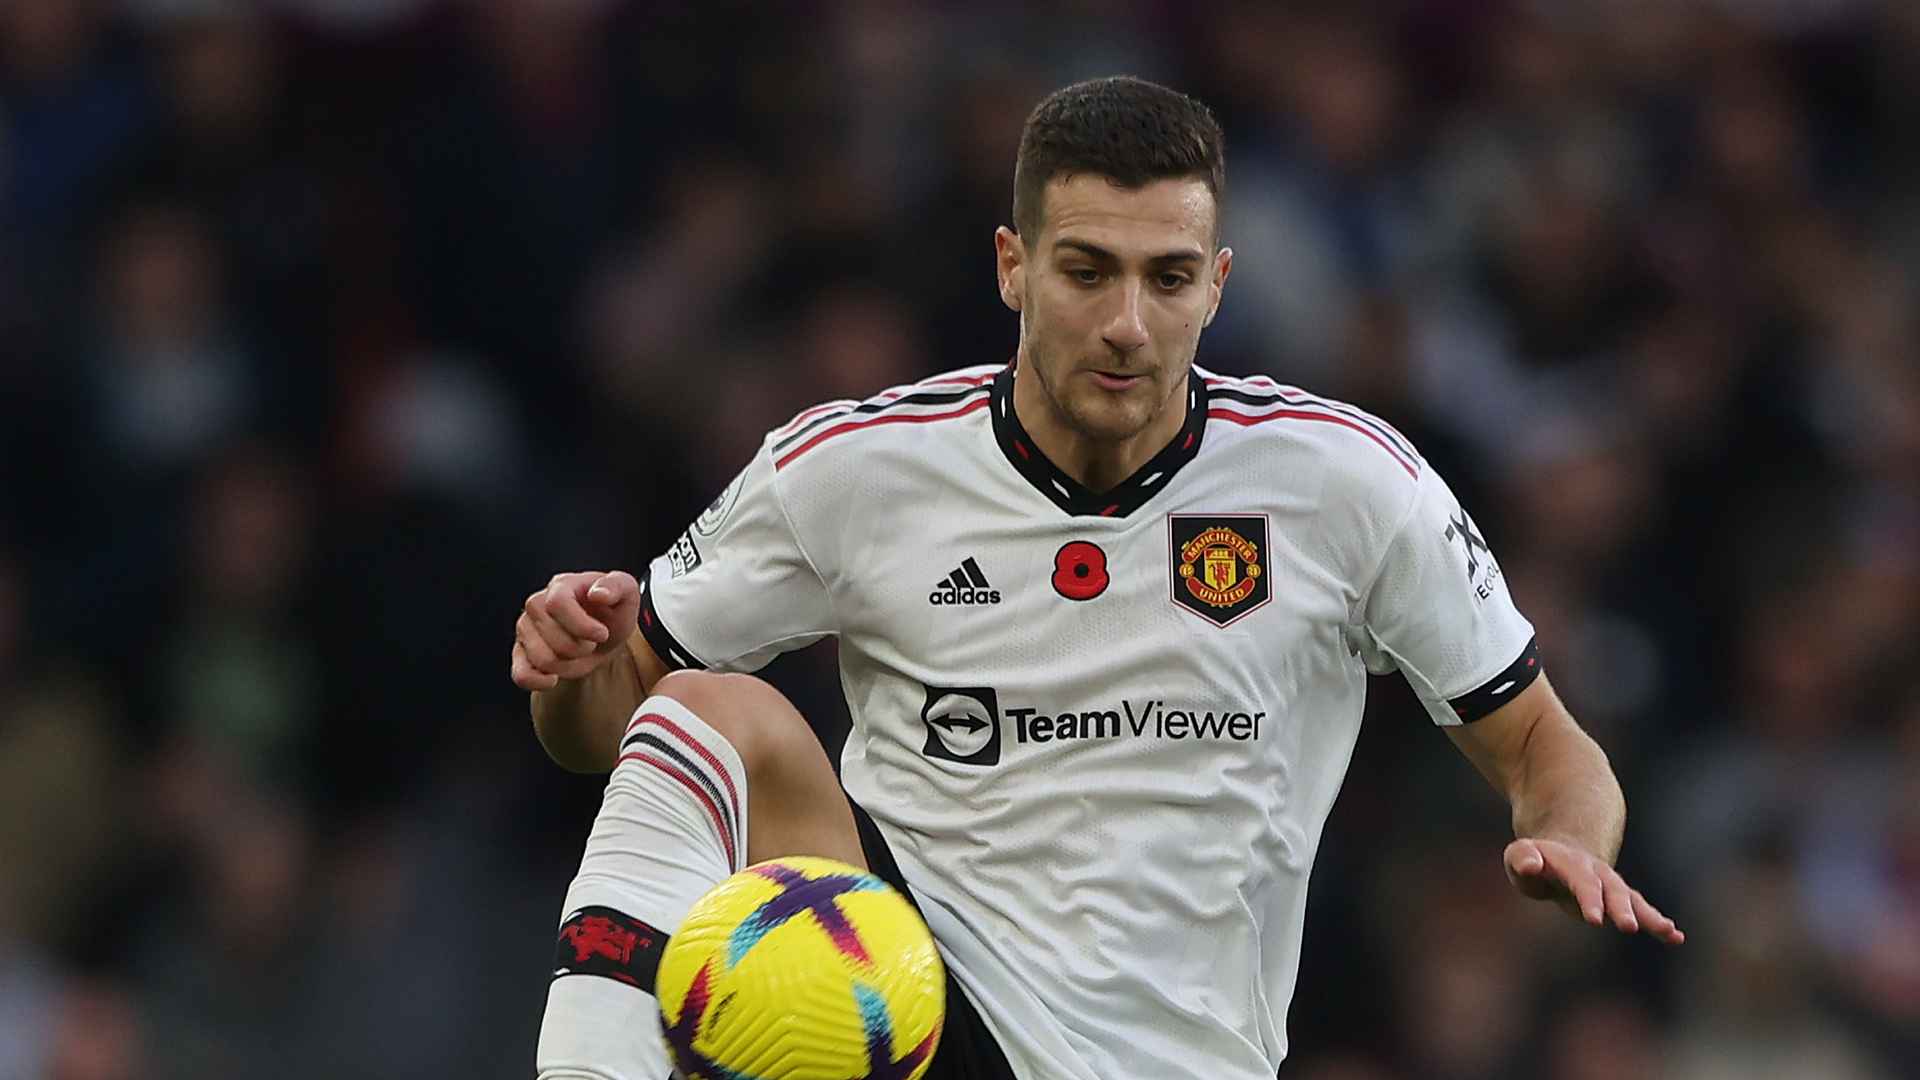 Diogo Dalot: “This will not erase what we are doing”